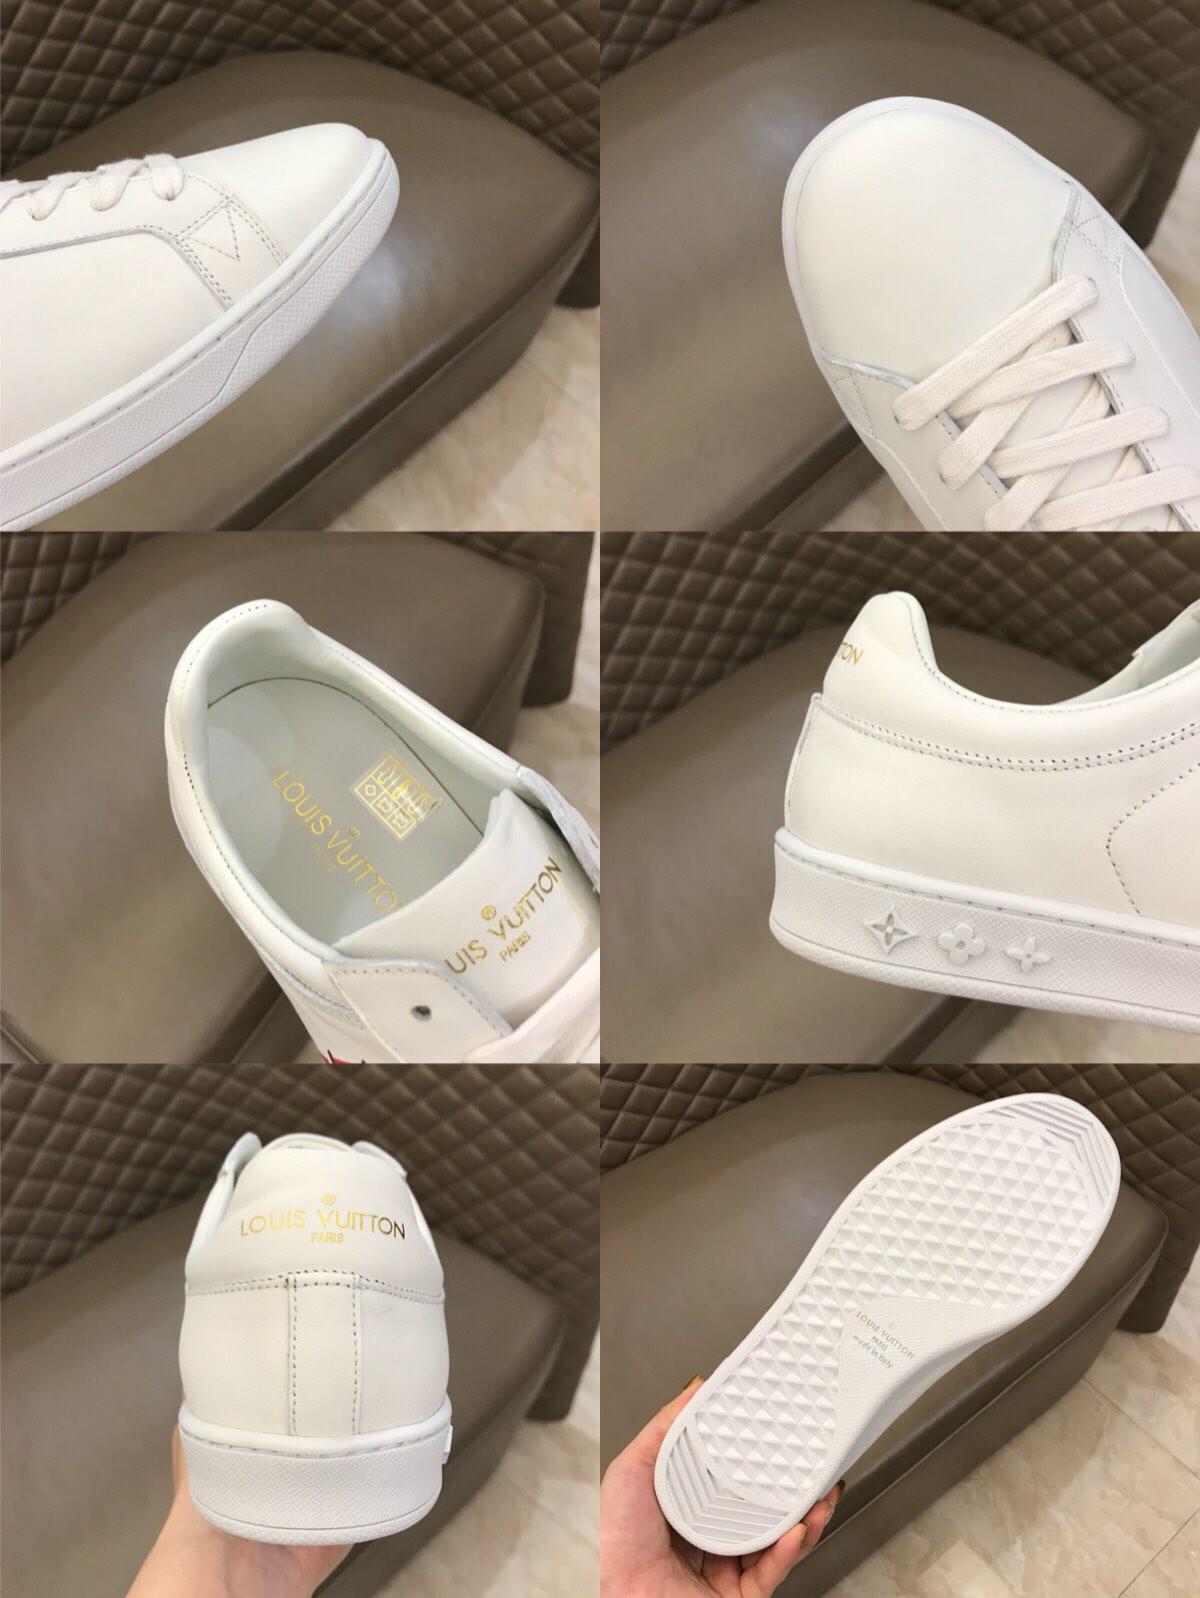 lv Fashion Sneakers White and LV stripe print with white sole MS02872